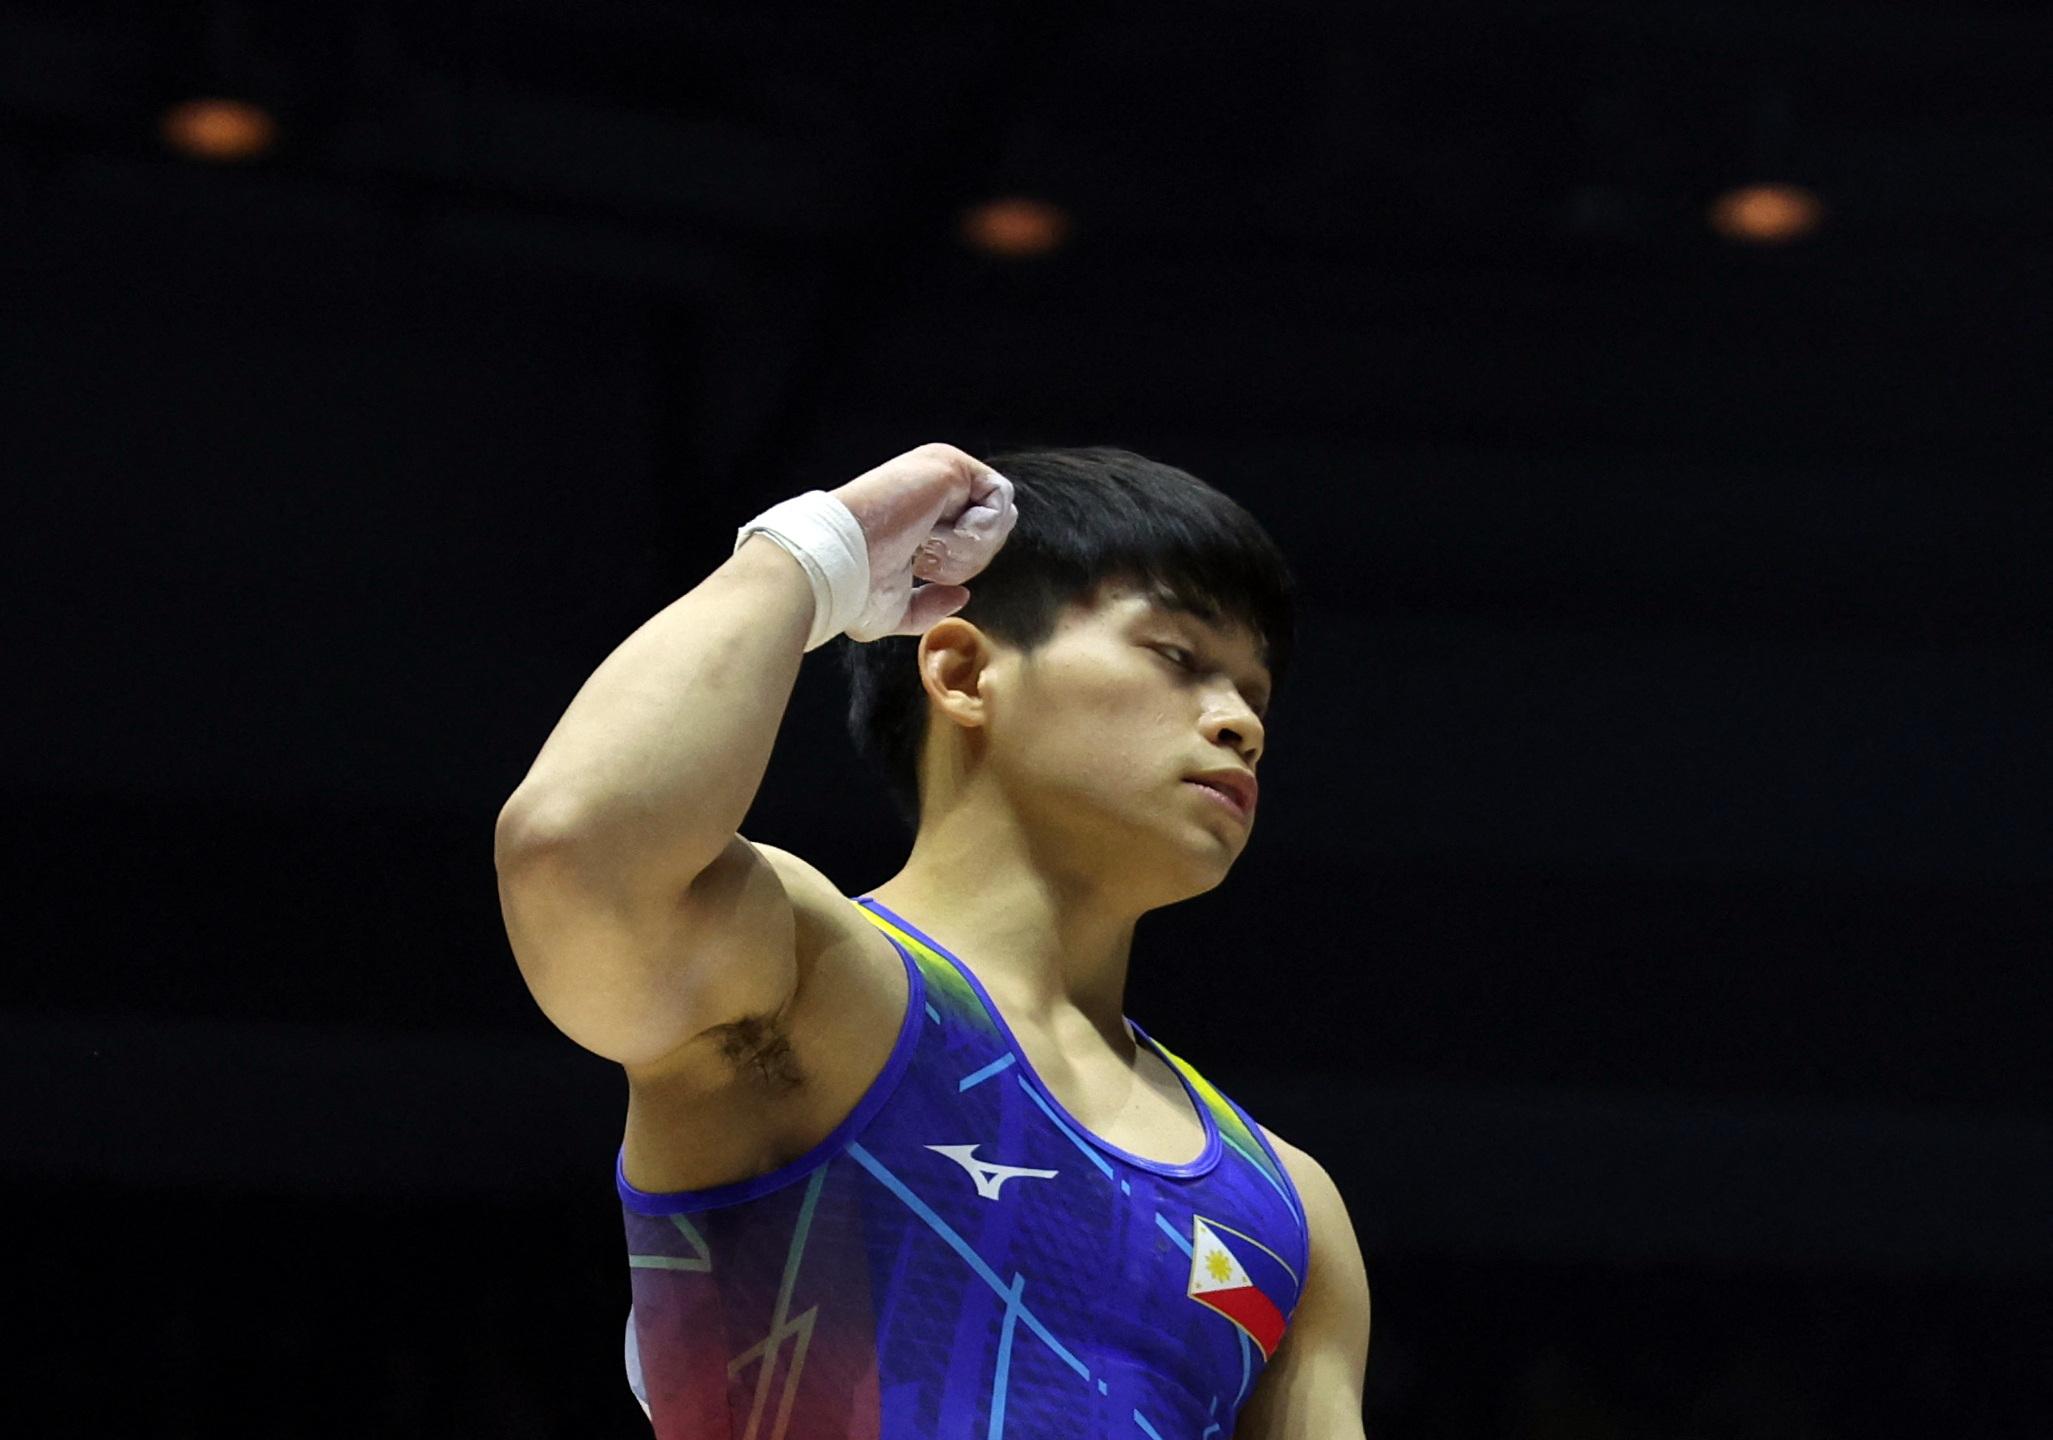 carlos yulo wins world cup series gold in parallel bars